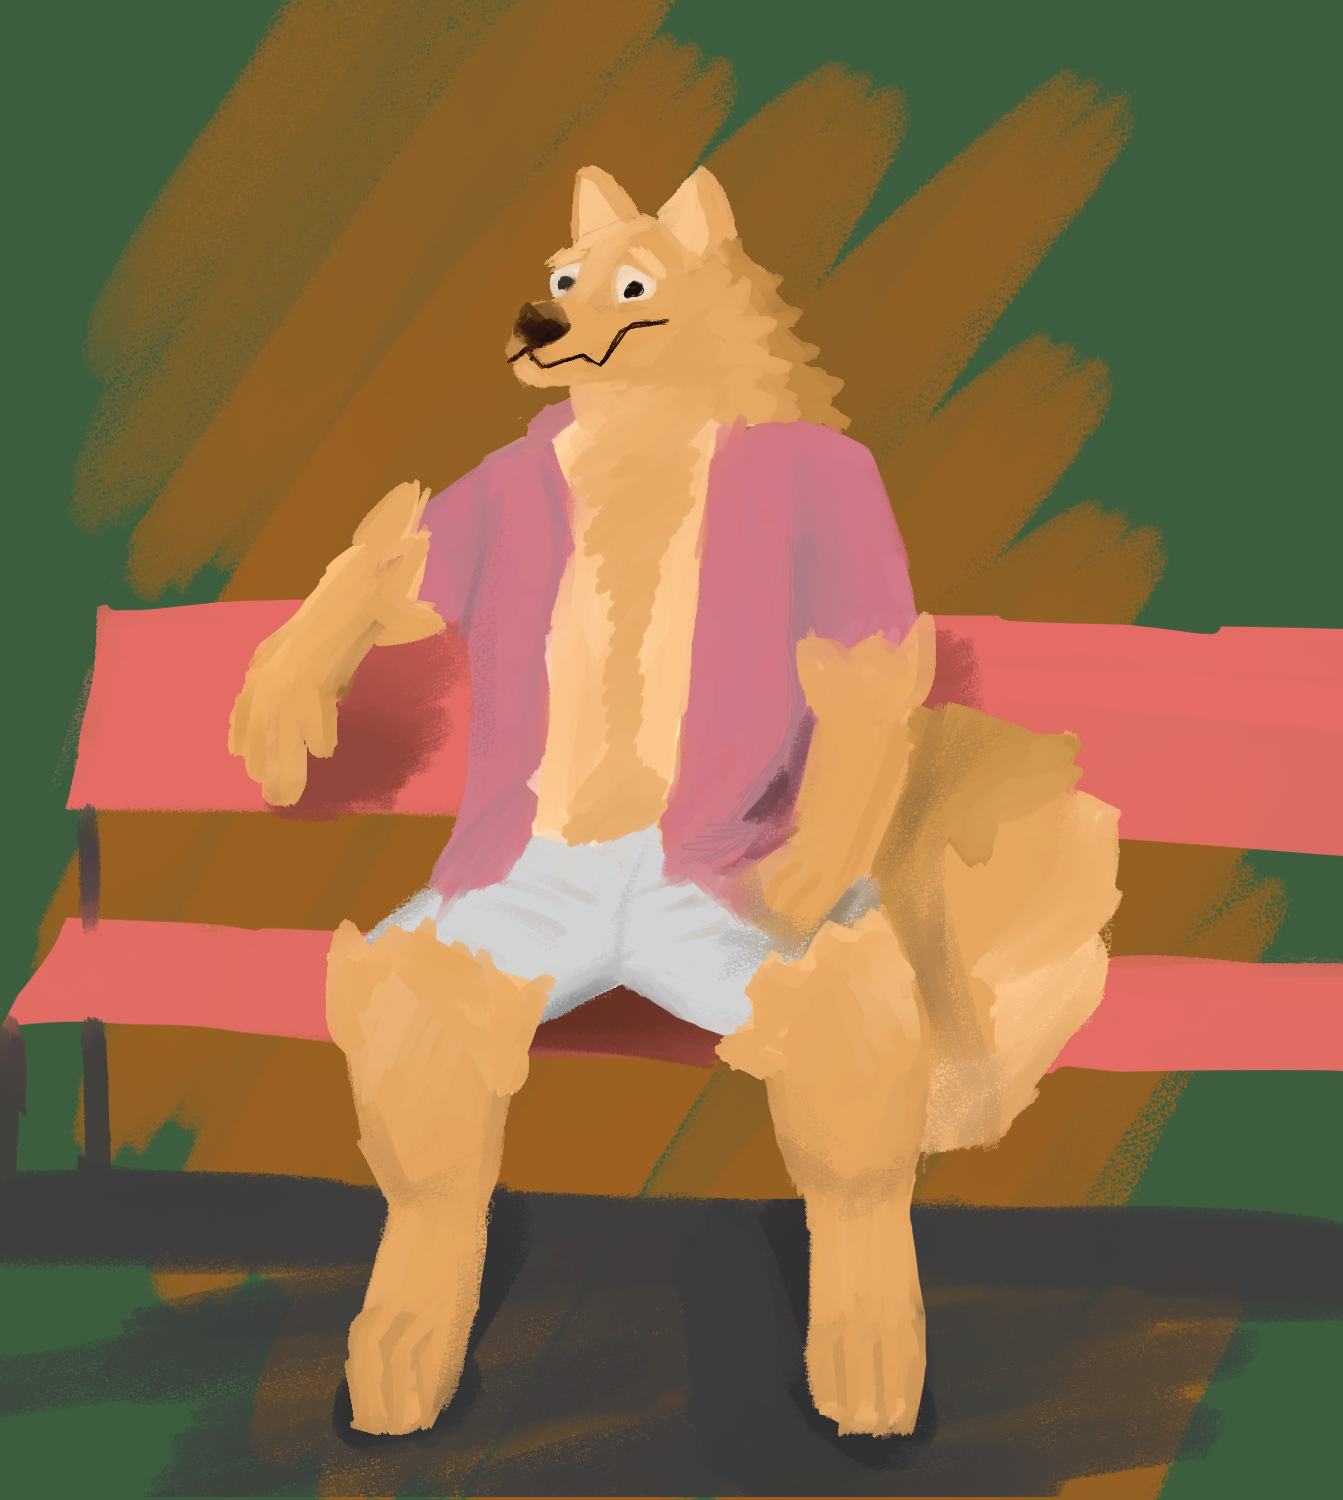 Dog furry with an awkward expression sits on a bench.